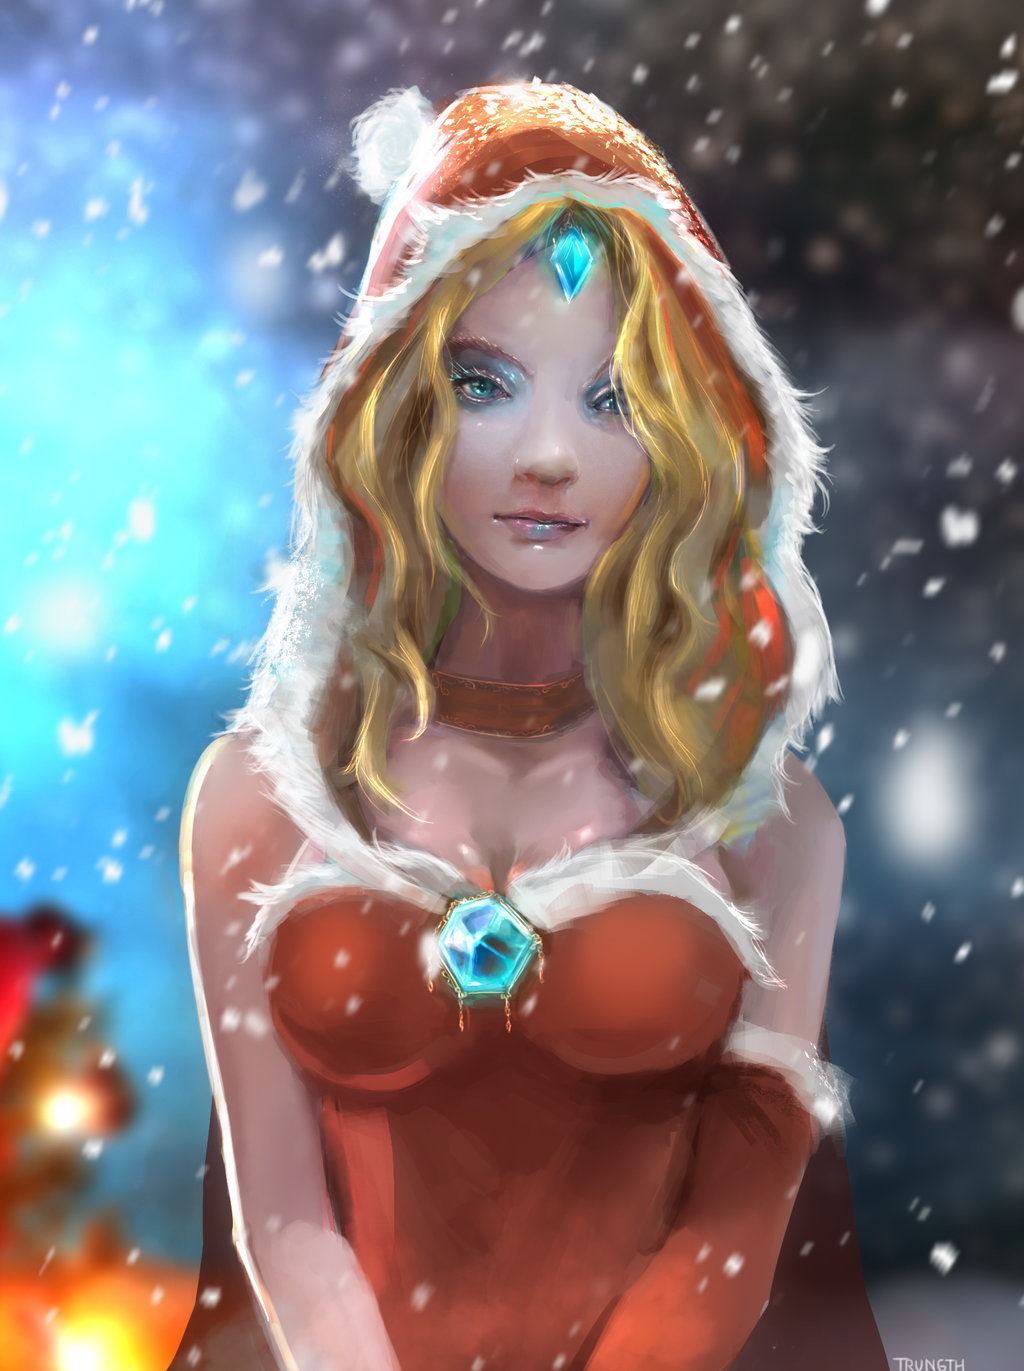 Crystal Maiden wishes you a merry Christmas.